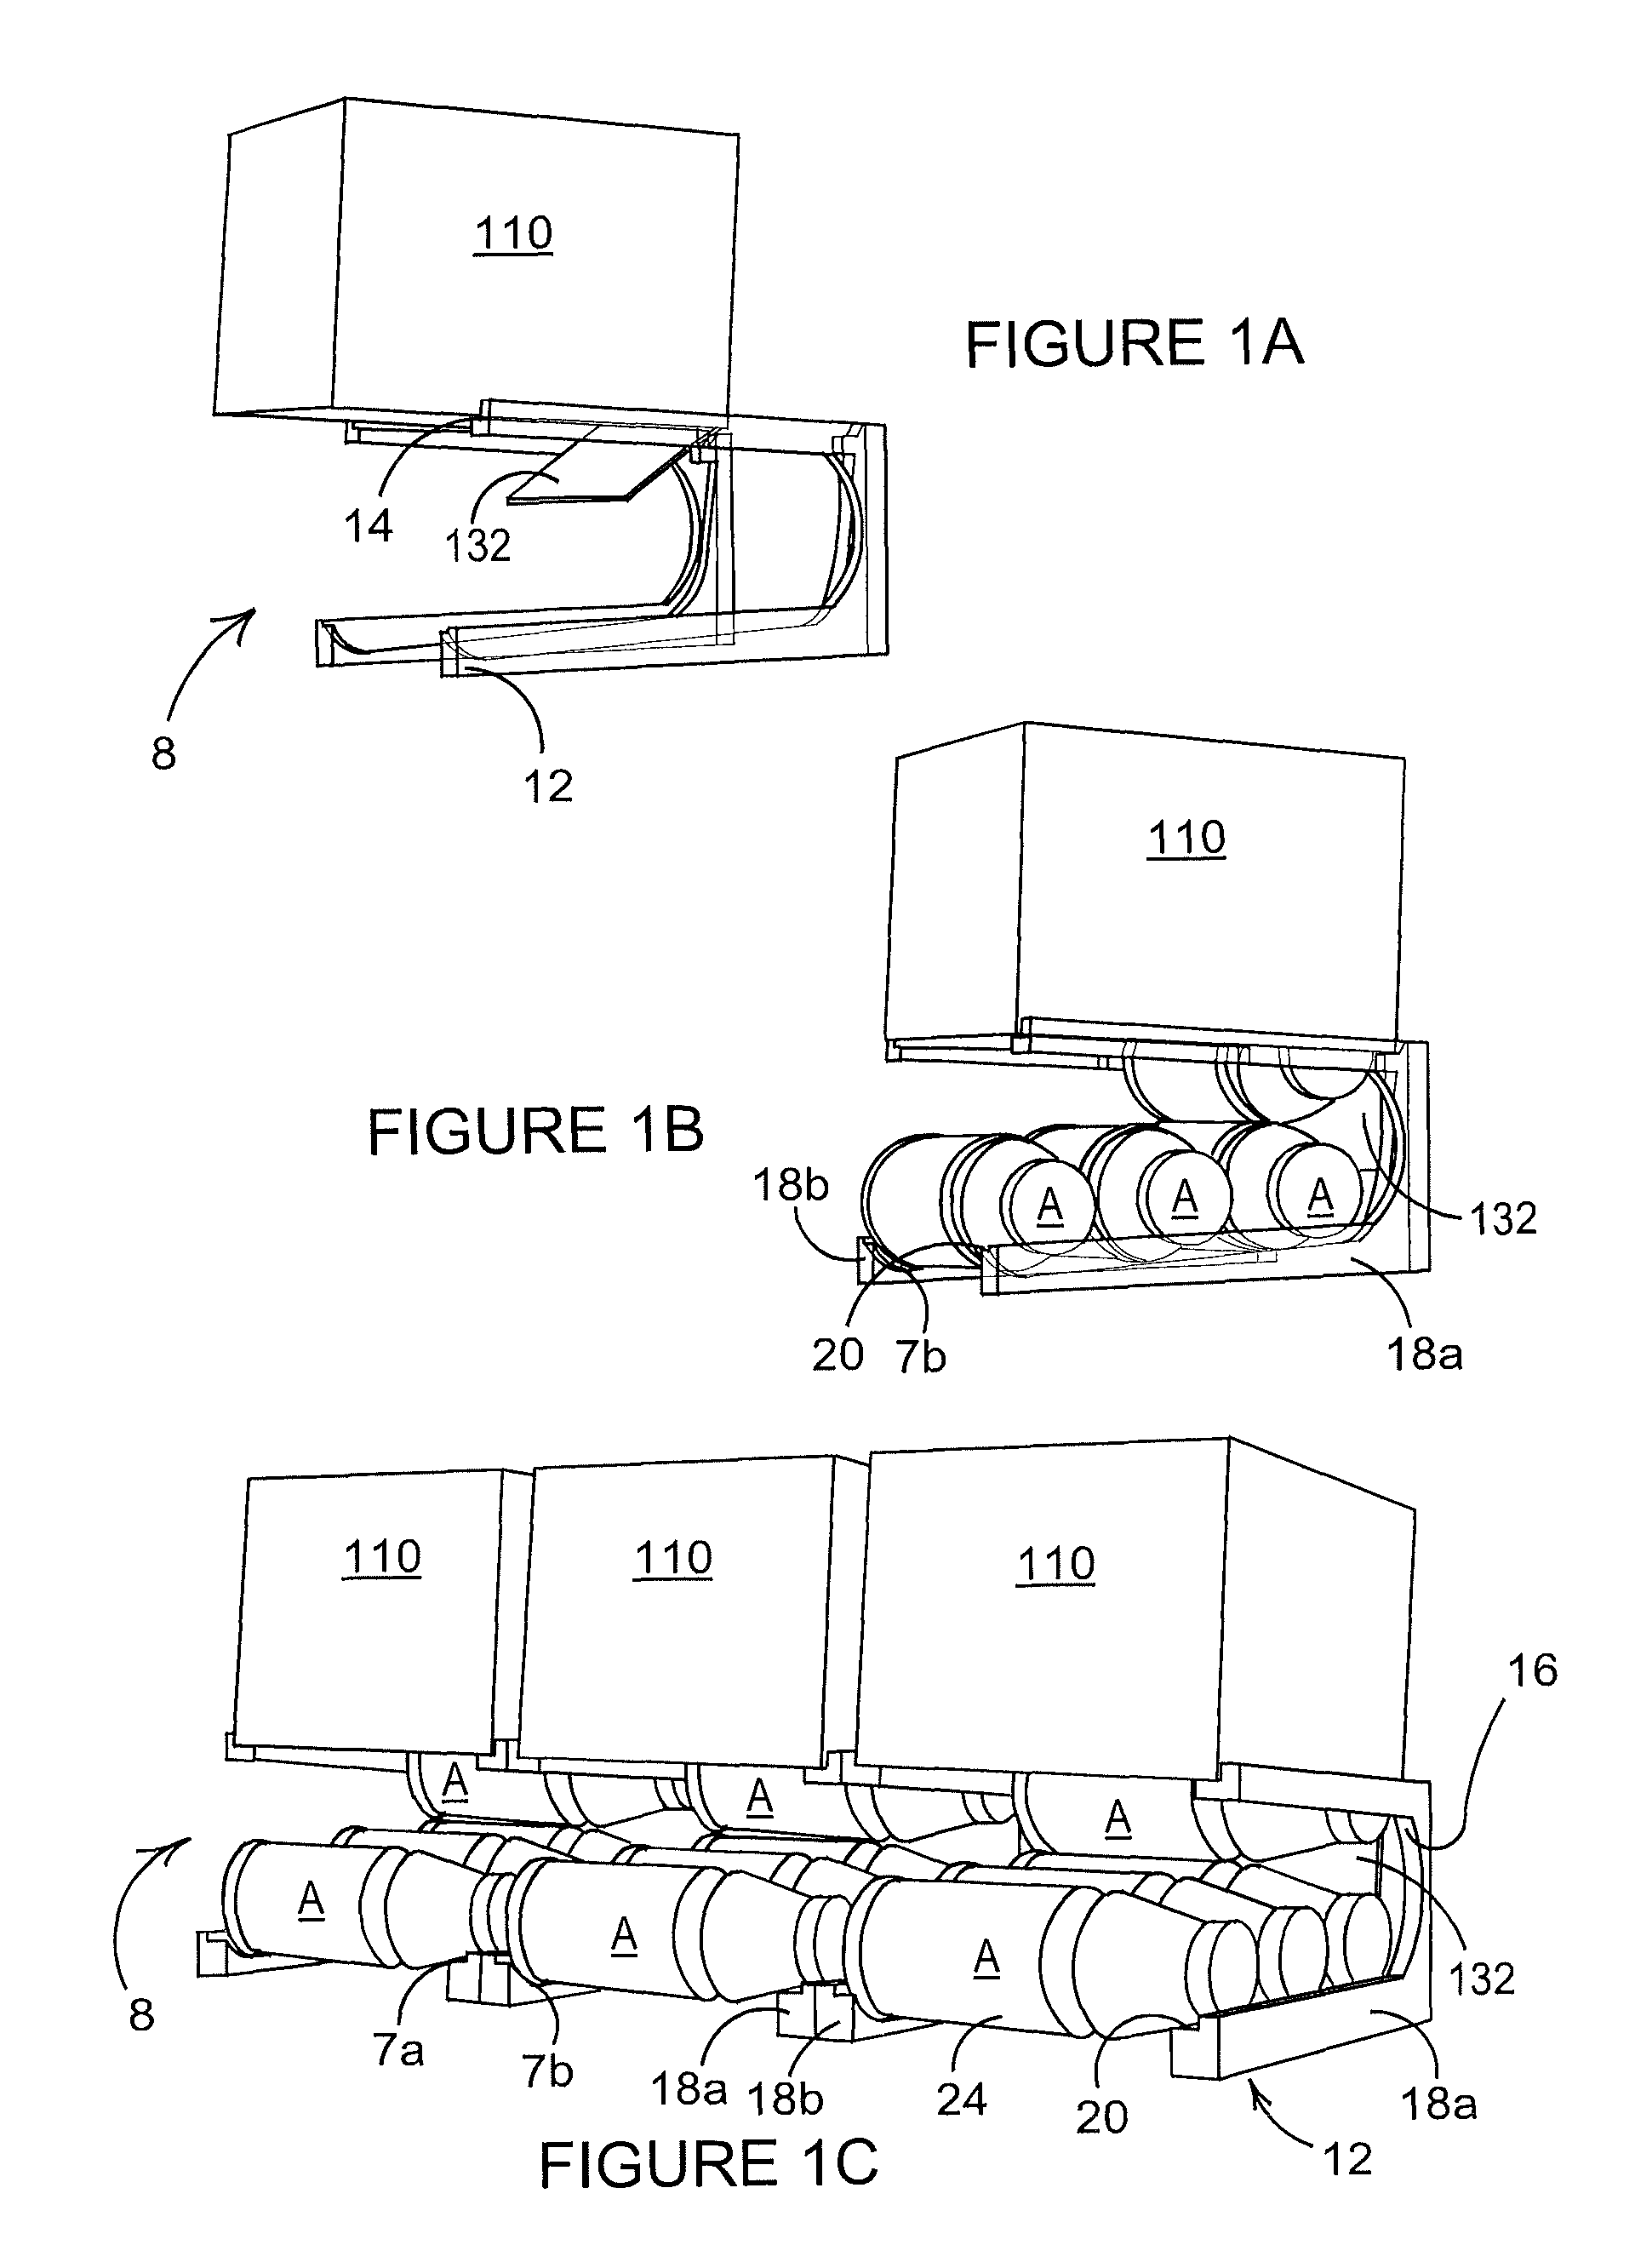 Display system, dispensing device and package for use therein